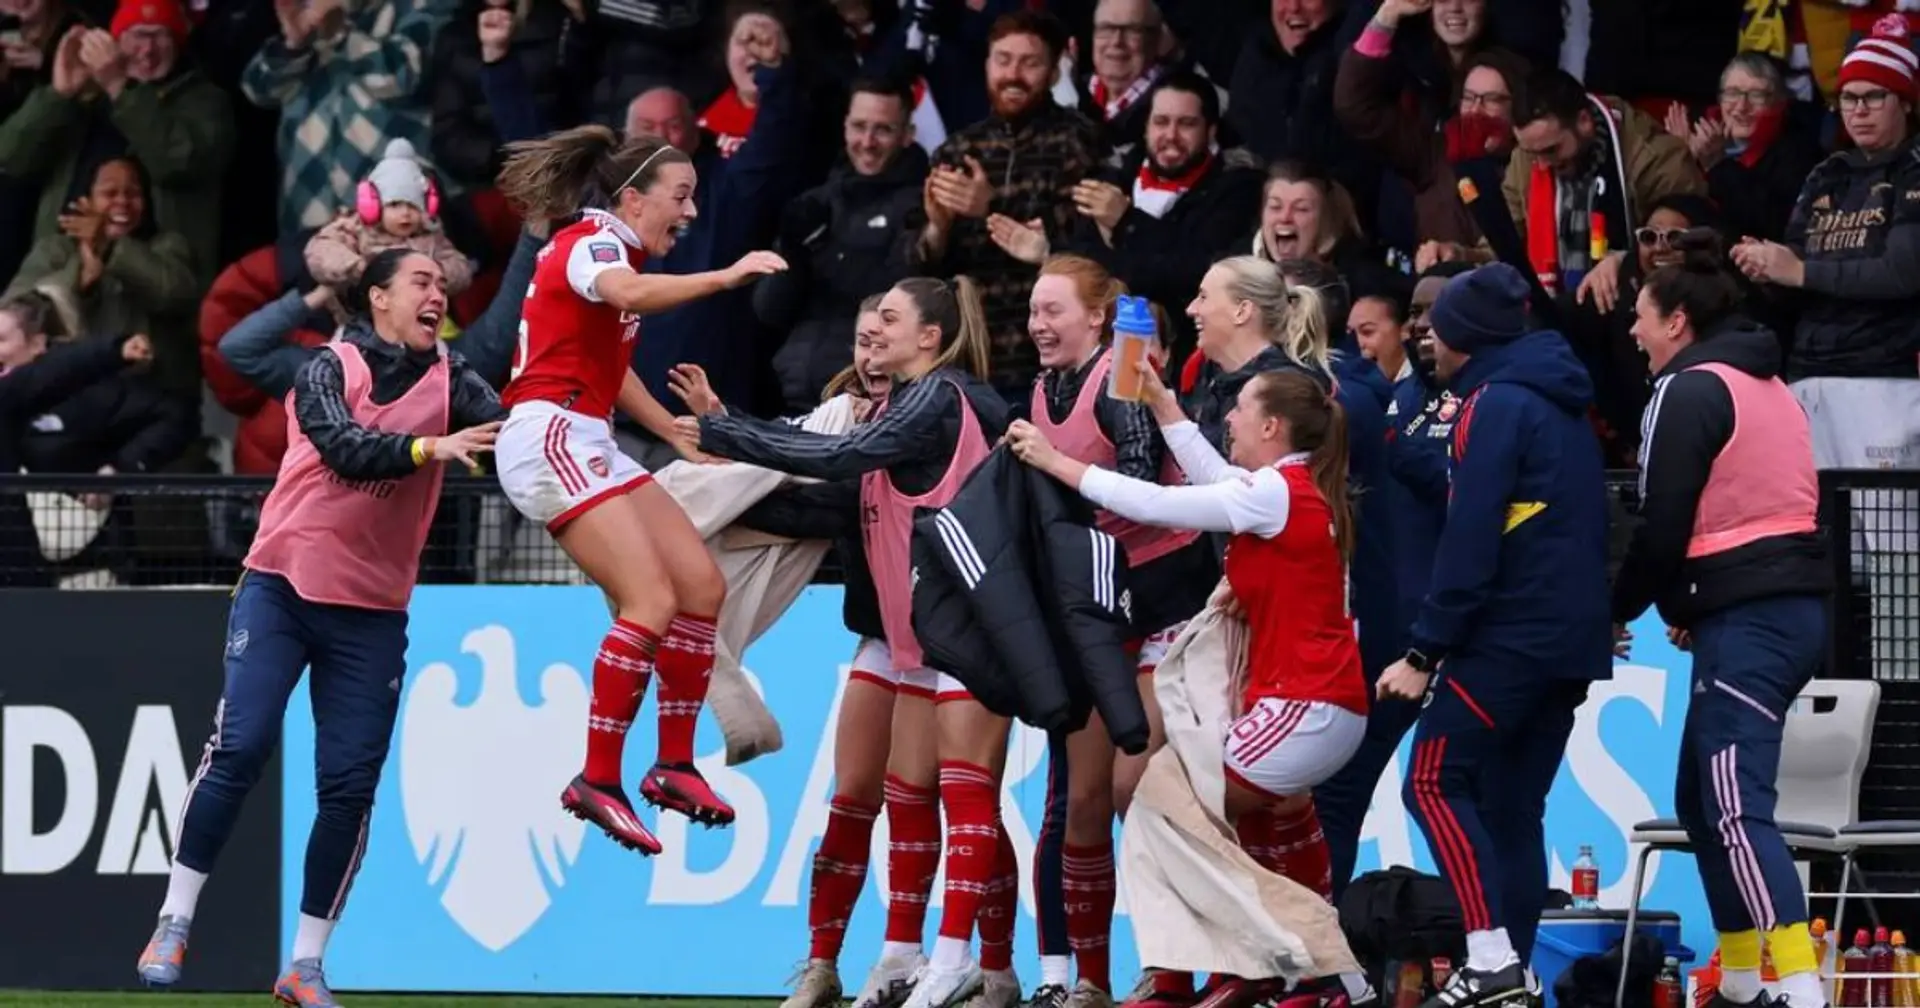 Unbeaten: Arsenal Women Academy teams shine in competitions